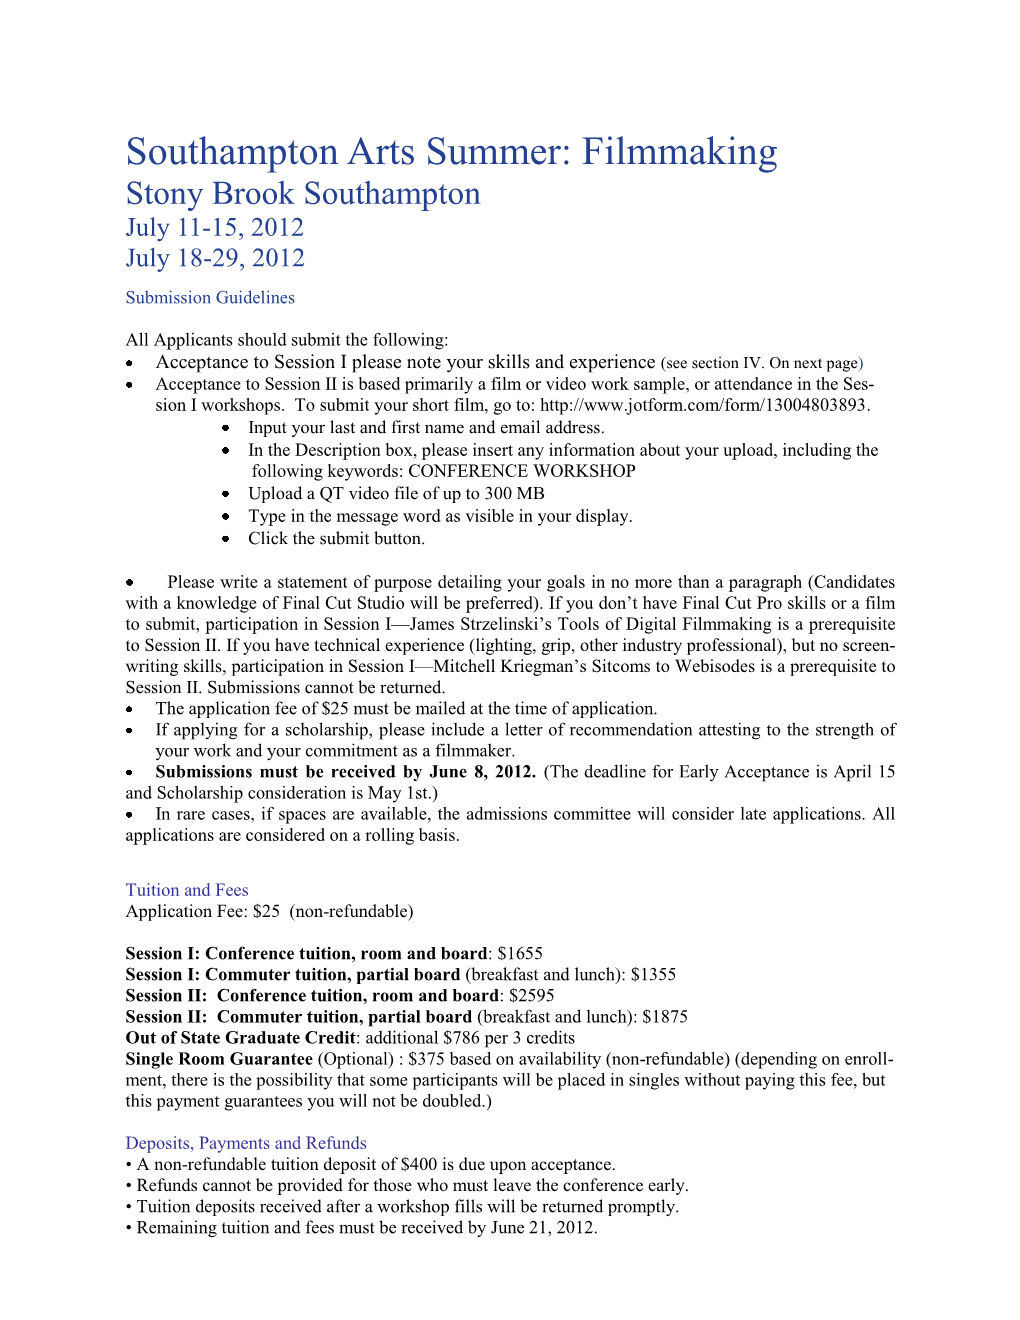 Southampton Arts Summer: Filmmaking Stony Brook Southampton July 11-15, 2012 July 18-29, 2012 Submission Guidelines